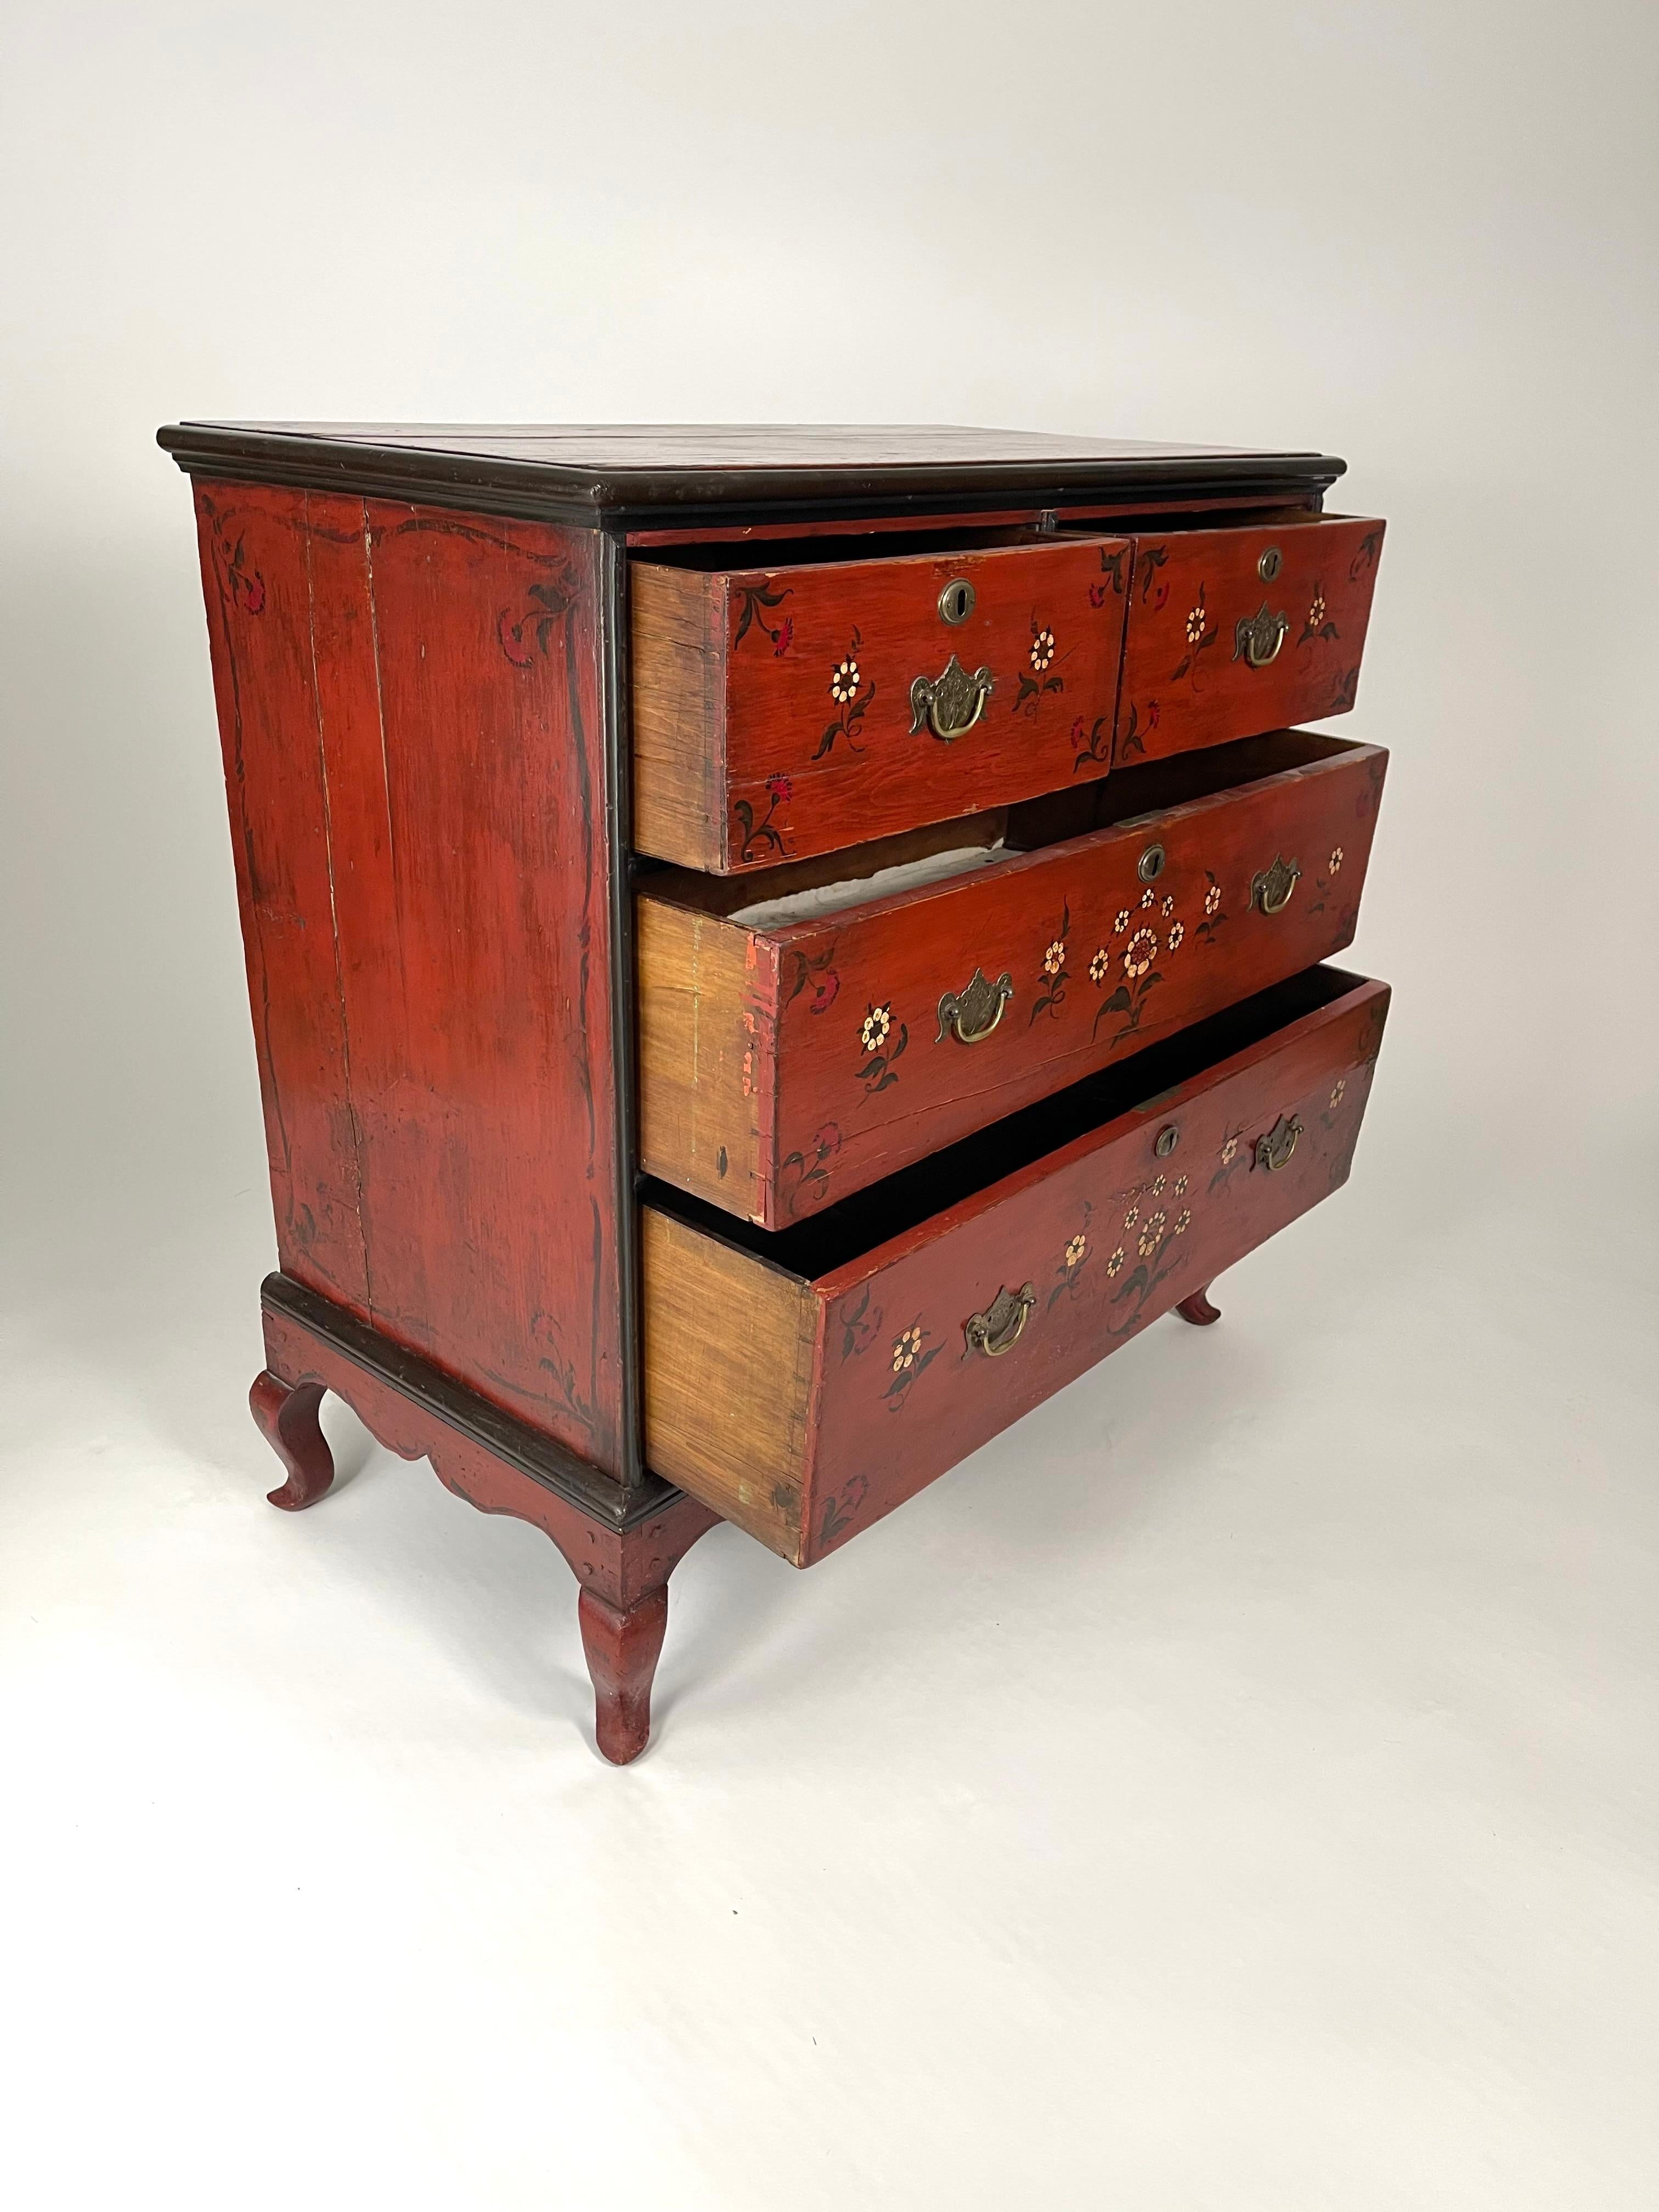 A charming red floral painted Queen Anne style chest of drawers, with painted black trim and stylized black cream and red flowers, with three long drawers each with engraved brass drawer pulls, the lock bearing the WR cypher of King William IV, with